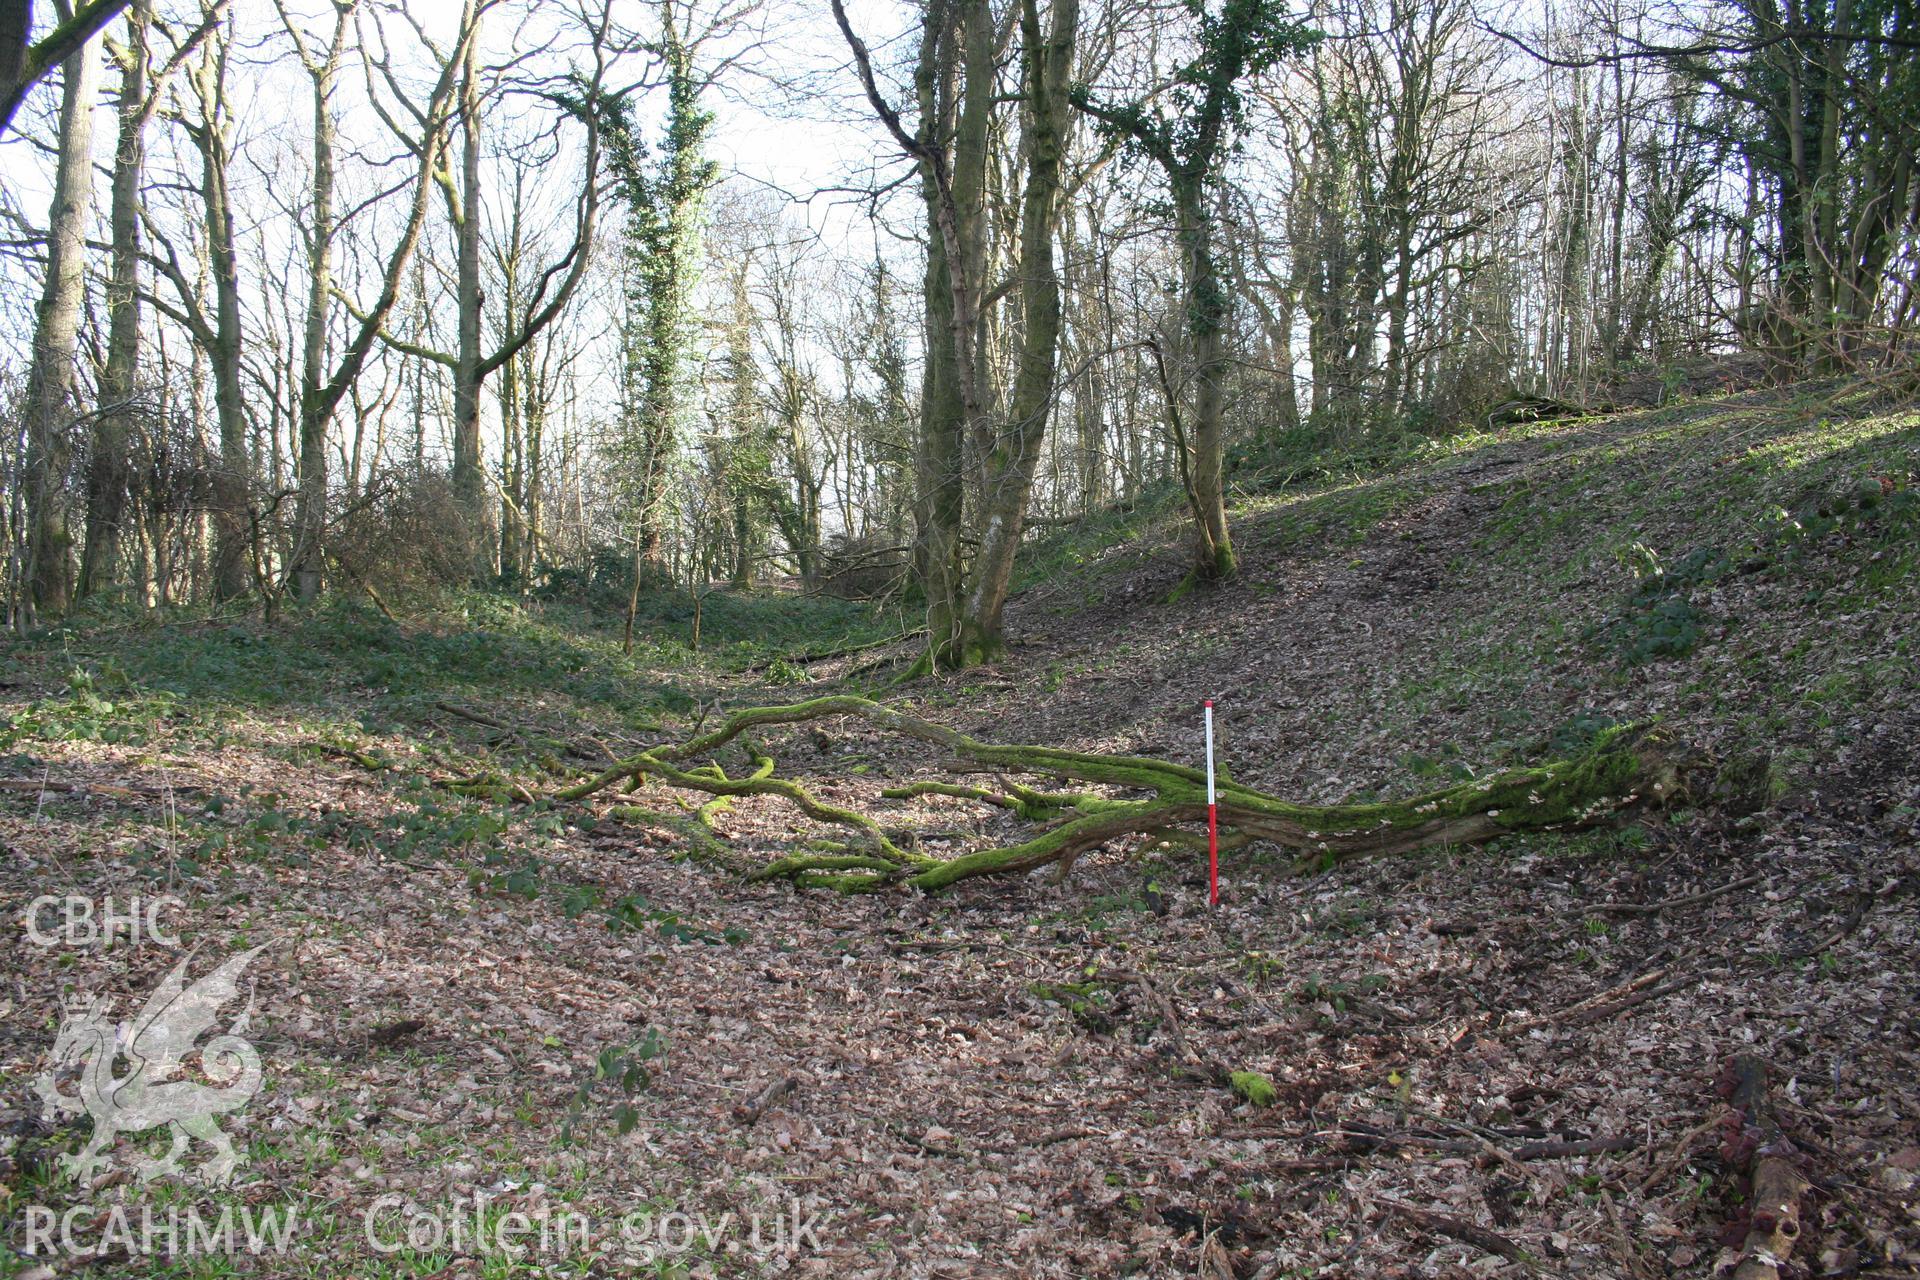 Gaer Fawr Hillfort.  Outer rampart ditch of the original summit fort, from the south (with scale).